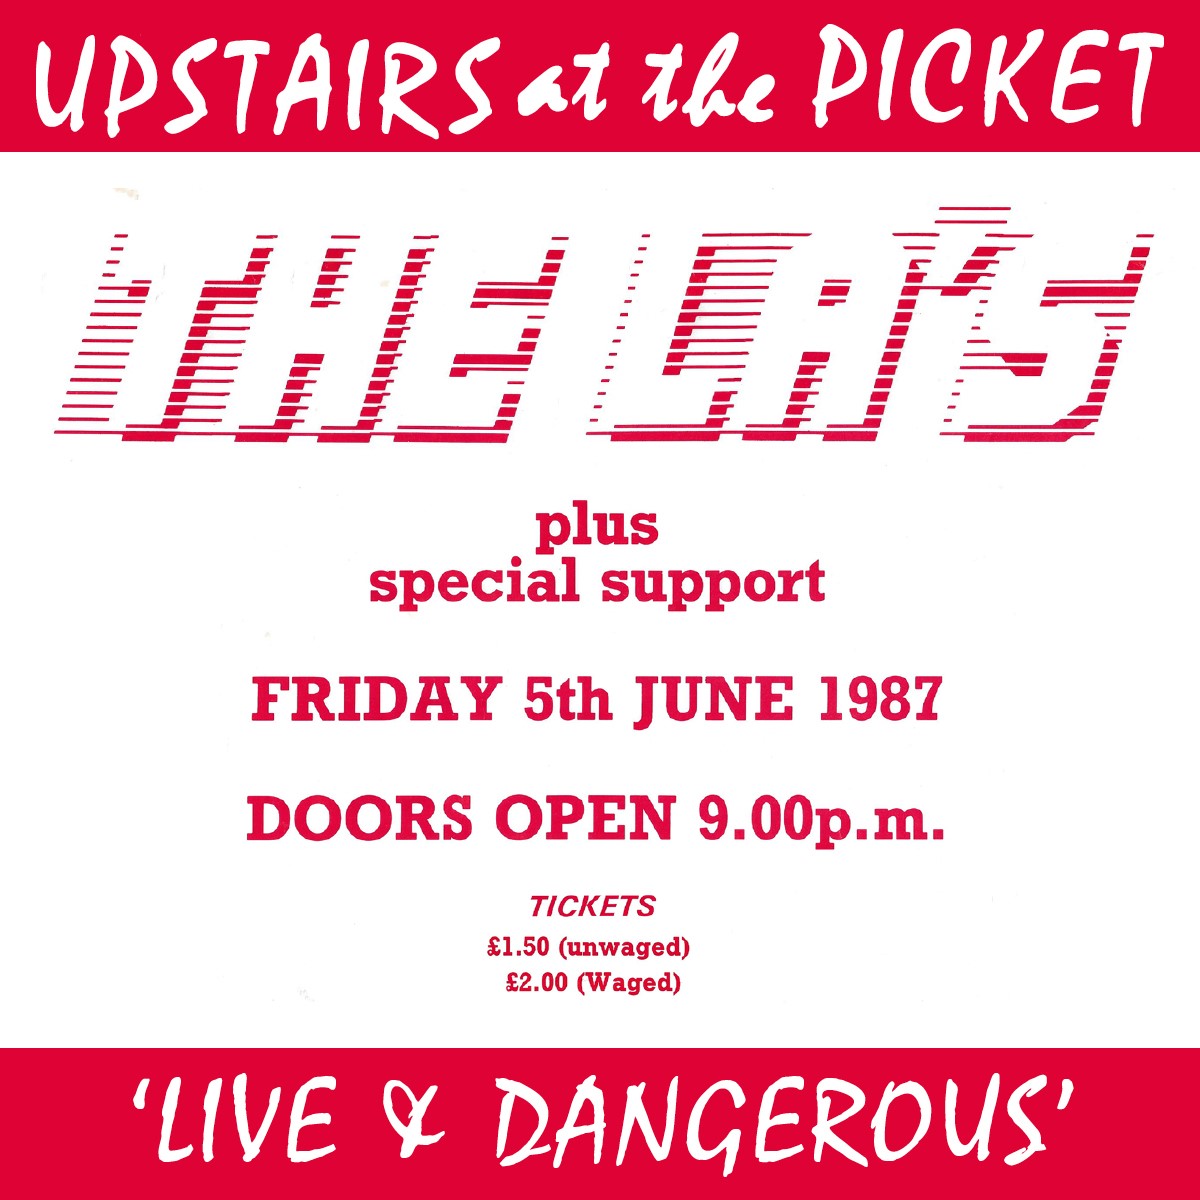 The La’s ‘Live & Dangerous’ Upstairs at the Picket 5/6/1987 - Viper 137 